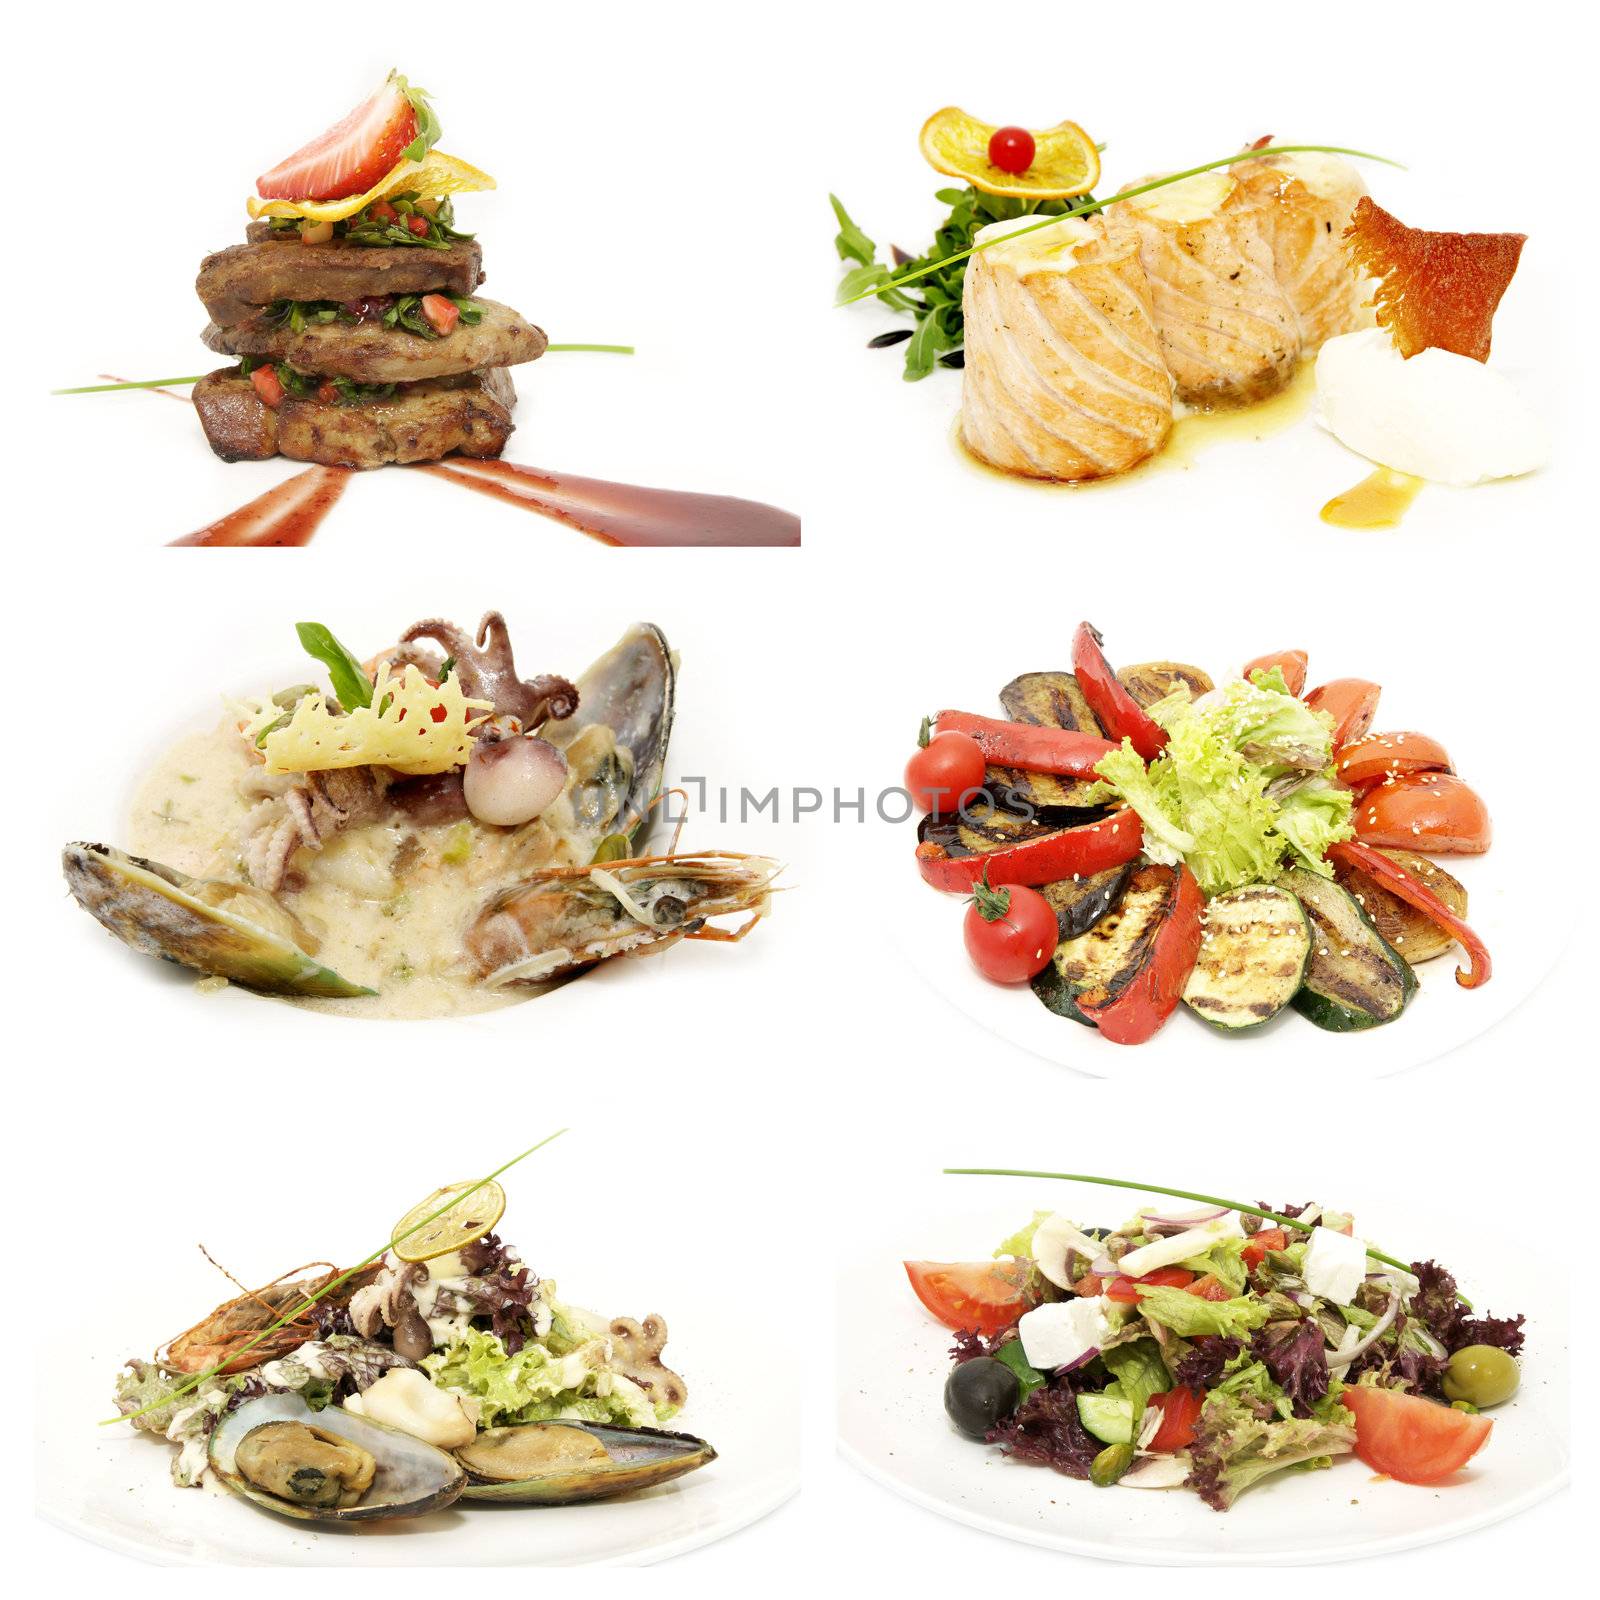 salads with vegetables and seafood in a restaurant by Lester120